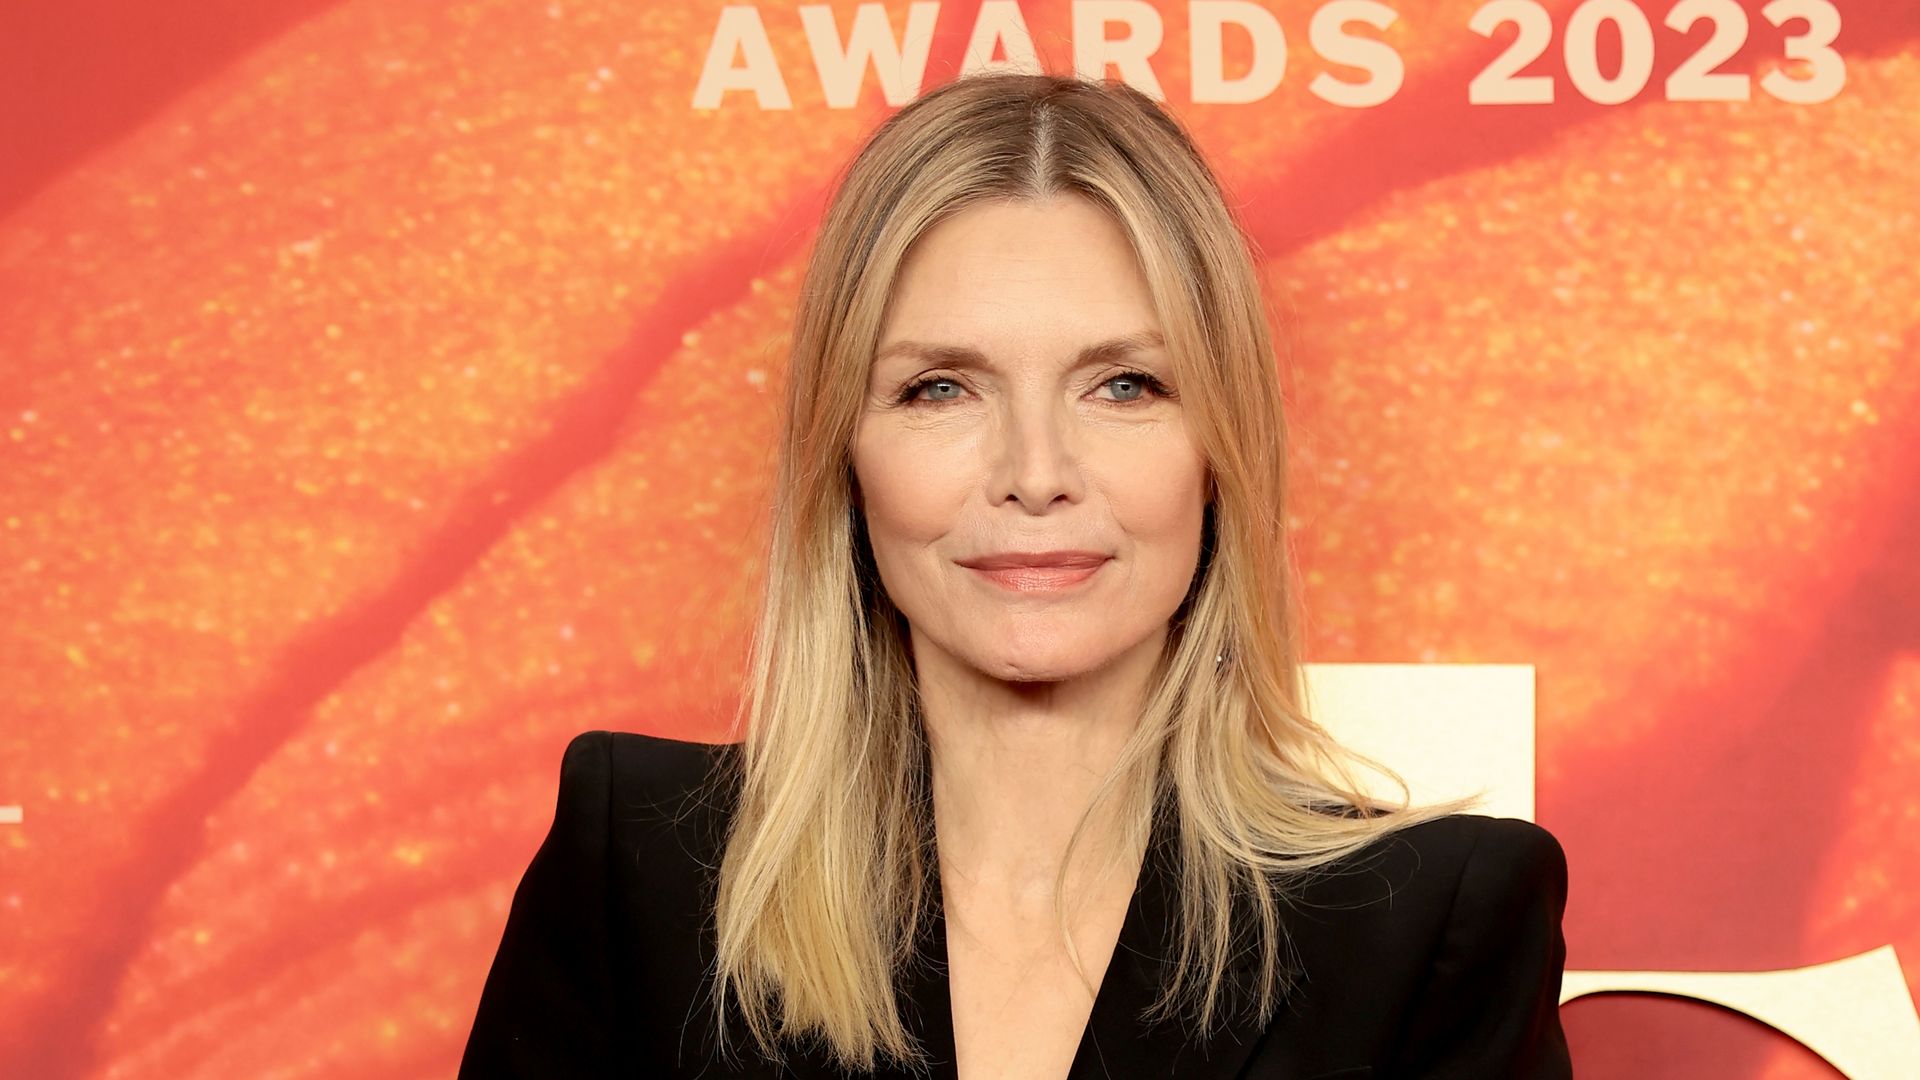 Michelle Pfeiffer attends The 2023 Fragrance Foundation Awards on June 15, 2023 in New York City.